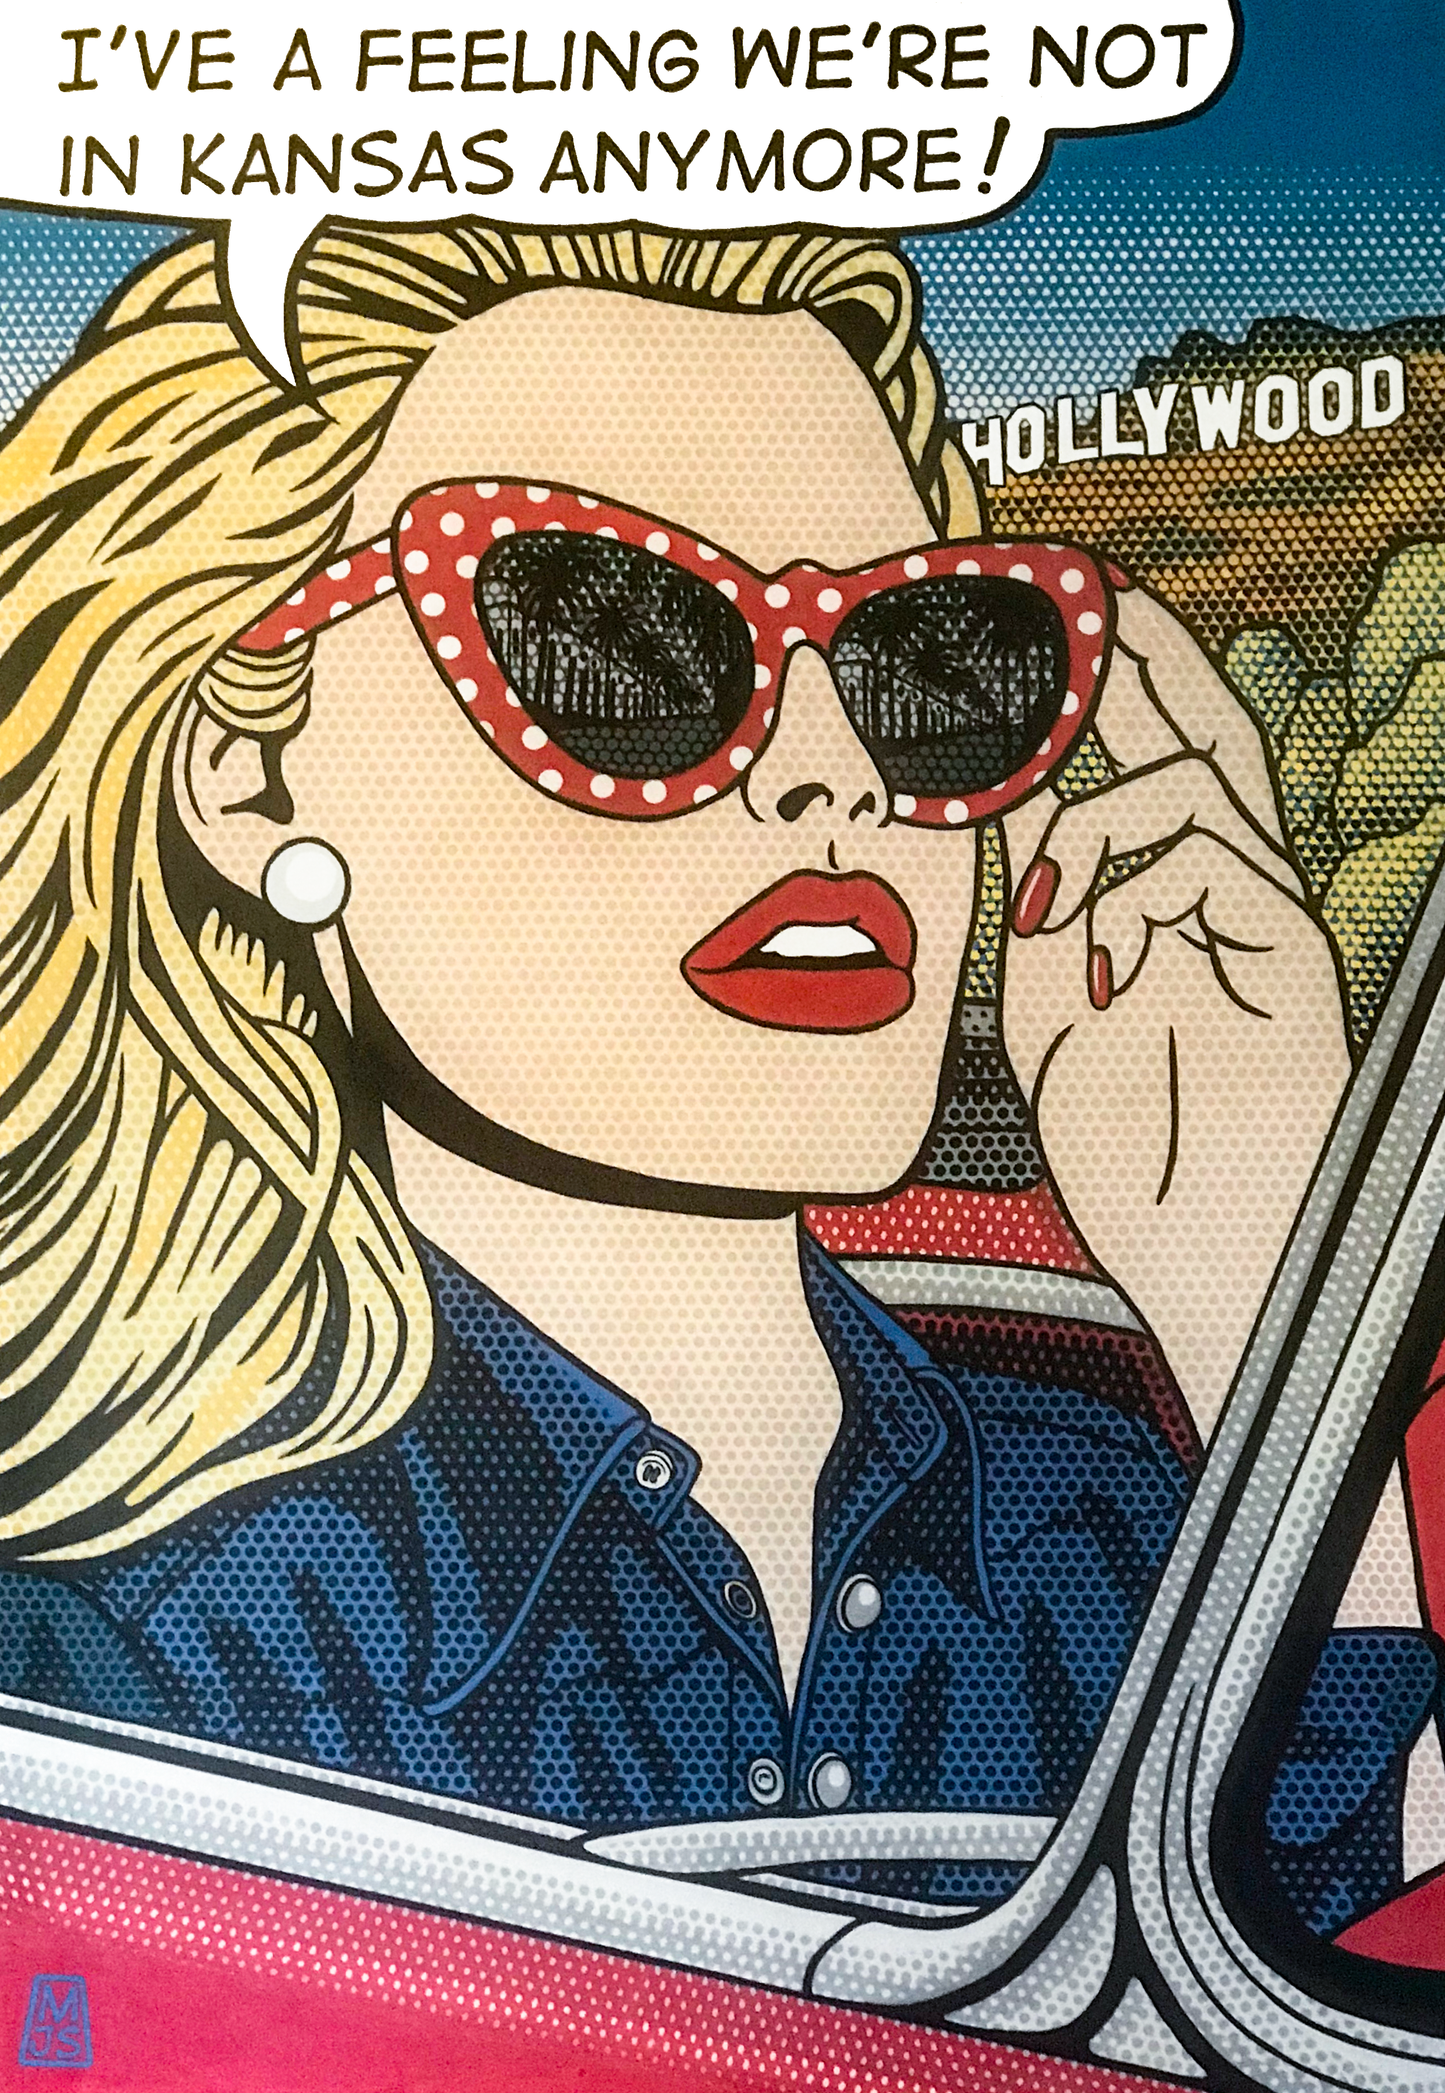 DOTTY IN HOLLYWOOD 48" x 32"